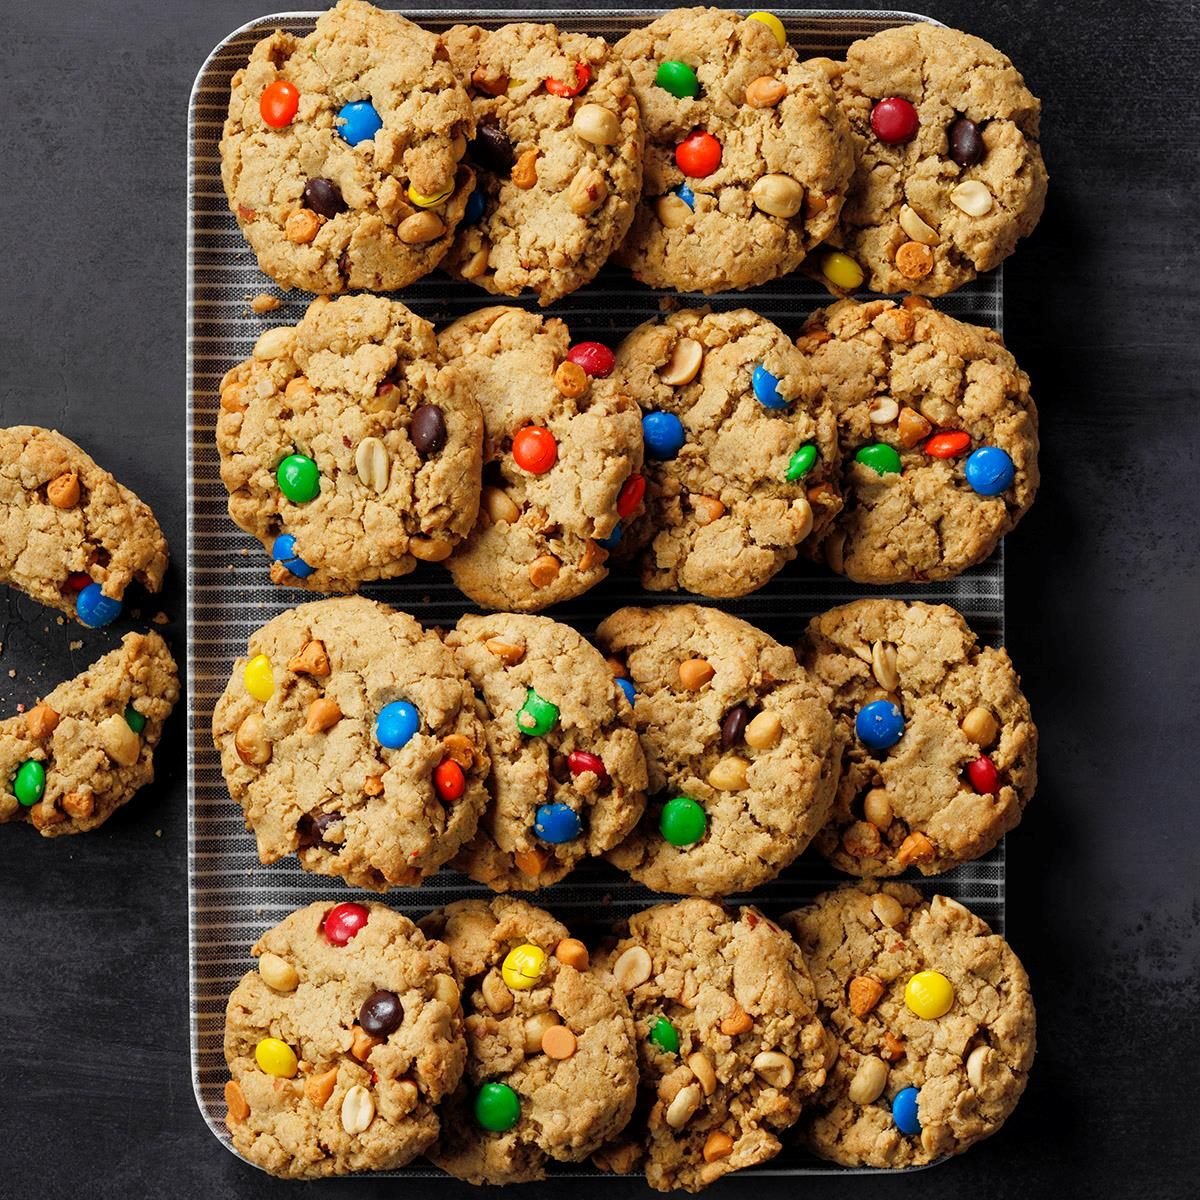 Crunchy Cookie M&M's Are Here—Here's Where to Find Them